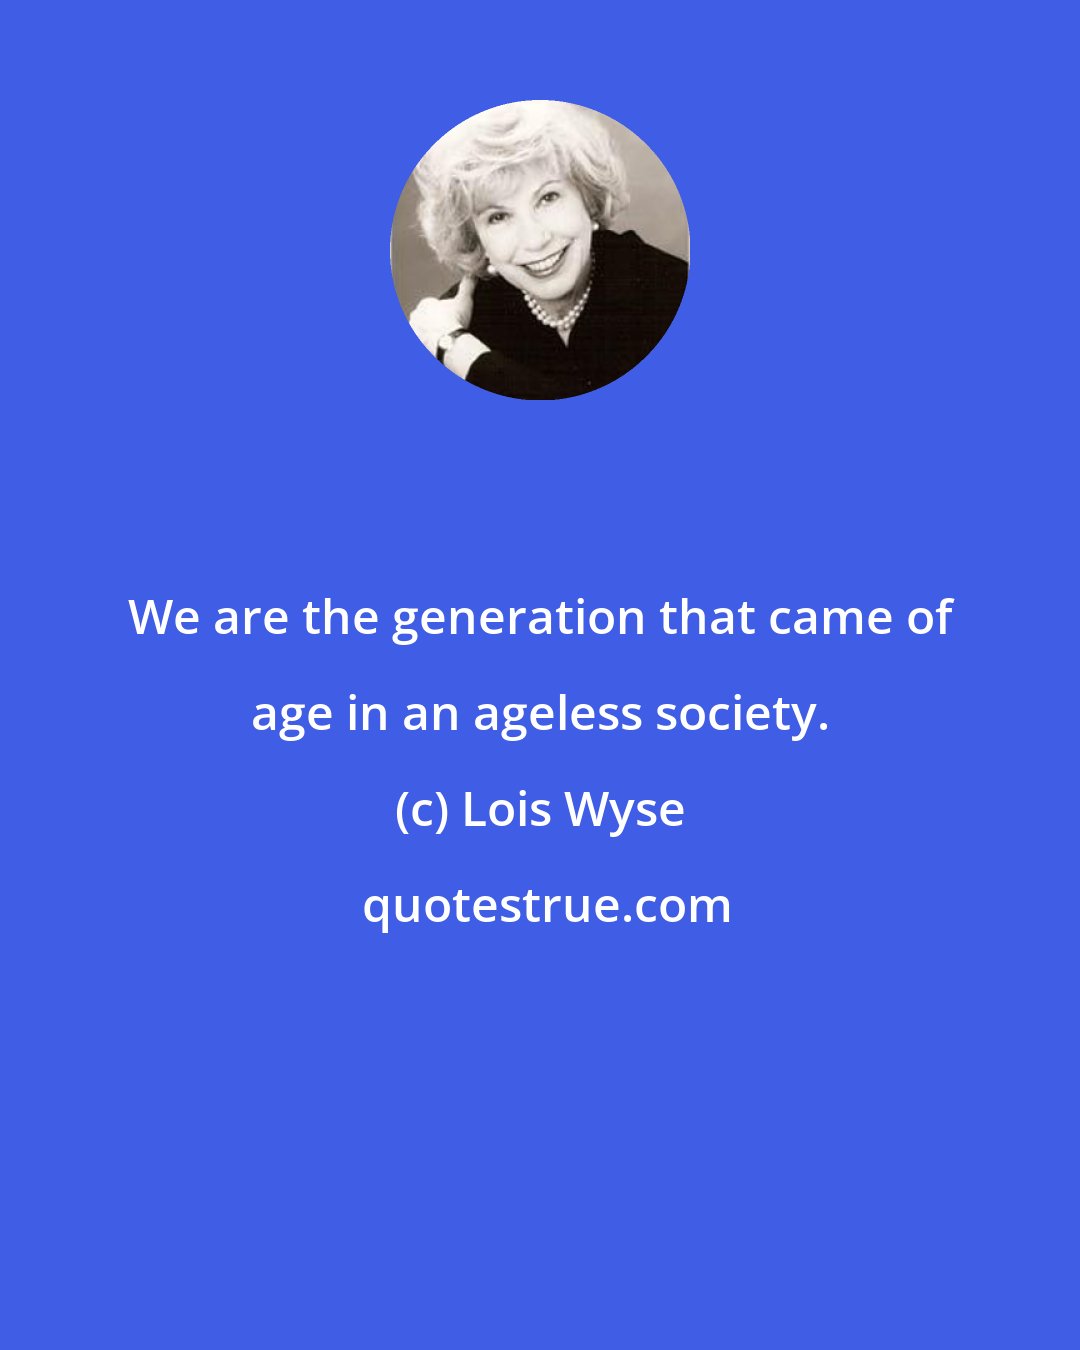 Lois Wyse: We are the generation that came of age in an ageless society.